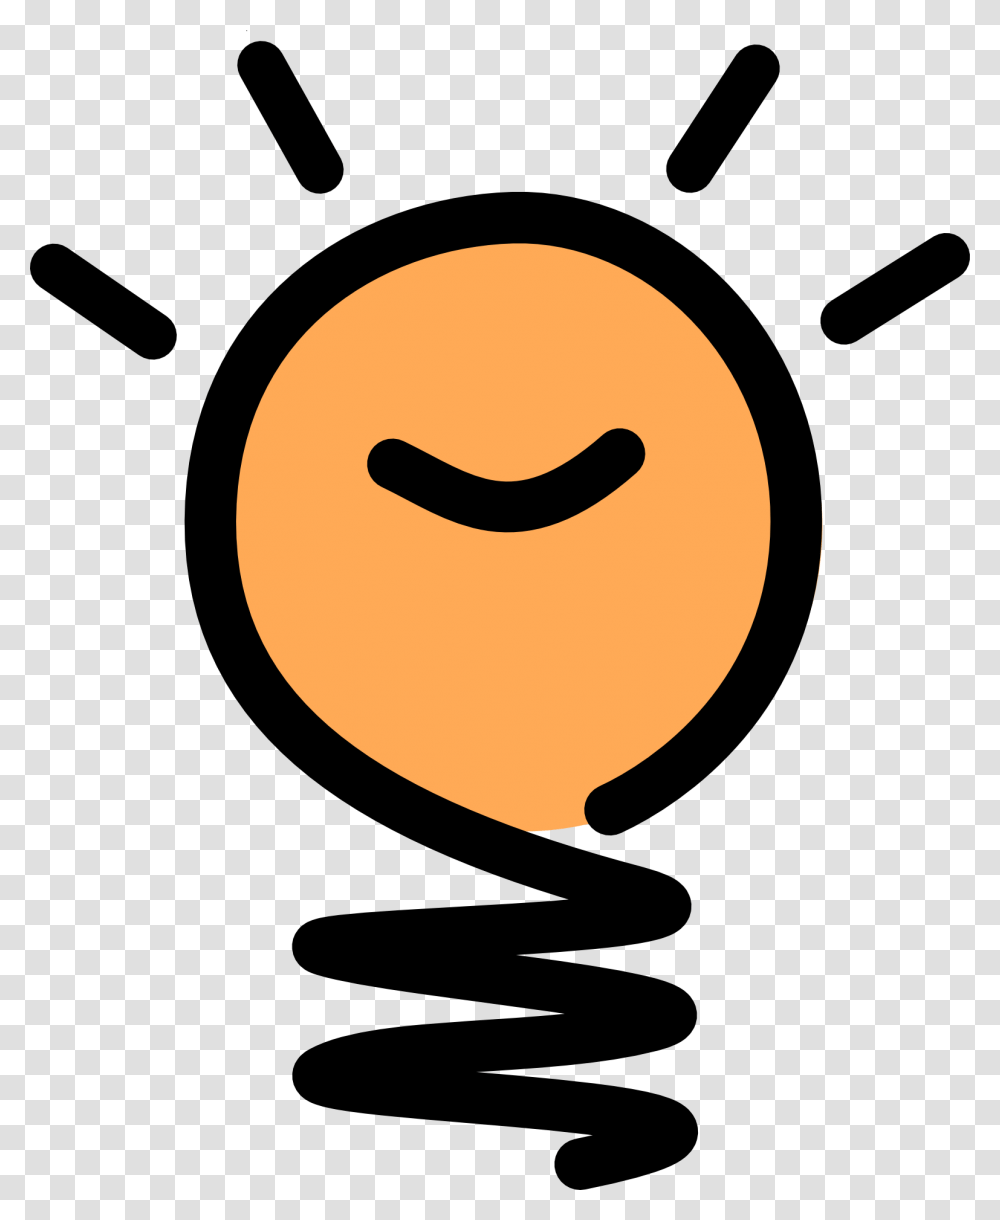 Lamp Lit Thought Free Vector Graphic On Pixabay Light Bulb Idea Transparent Png